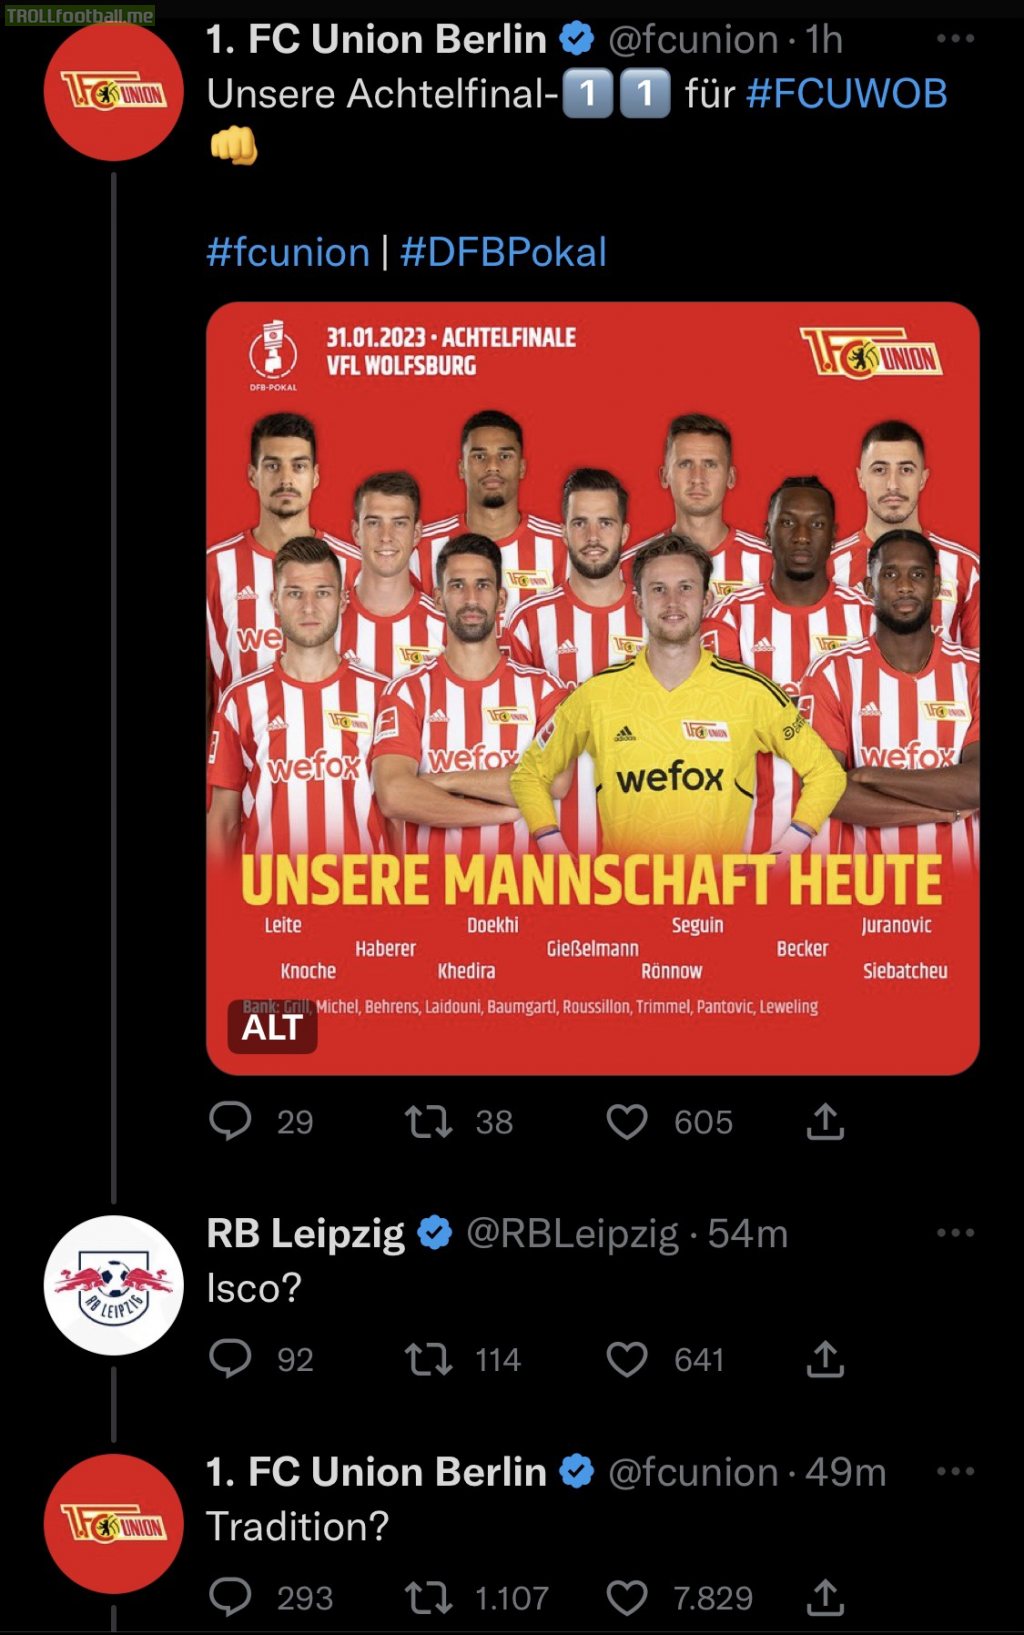 [Union Berlin]‘s reply to RB Leipzig taunting them for not signing Isco on Twitter